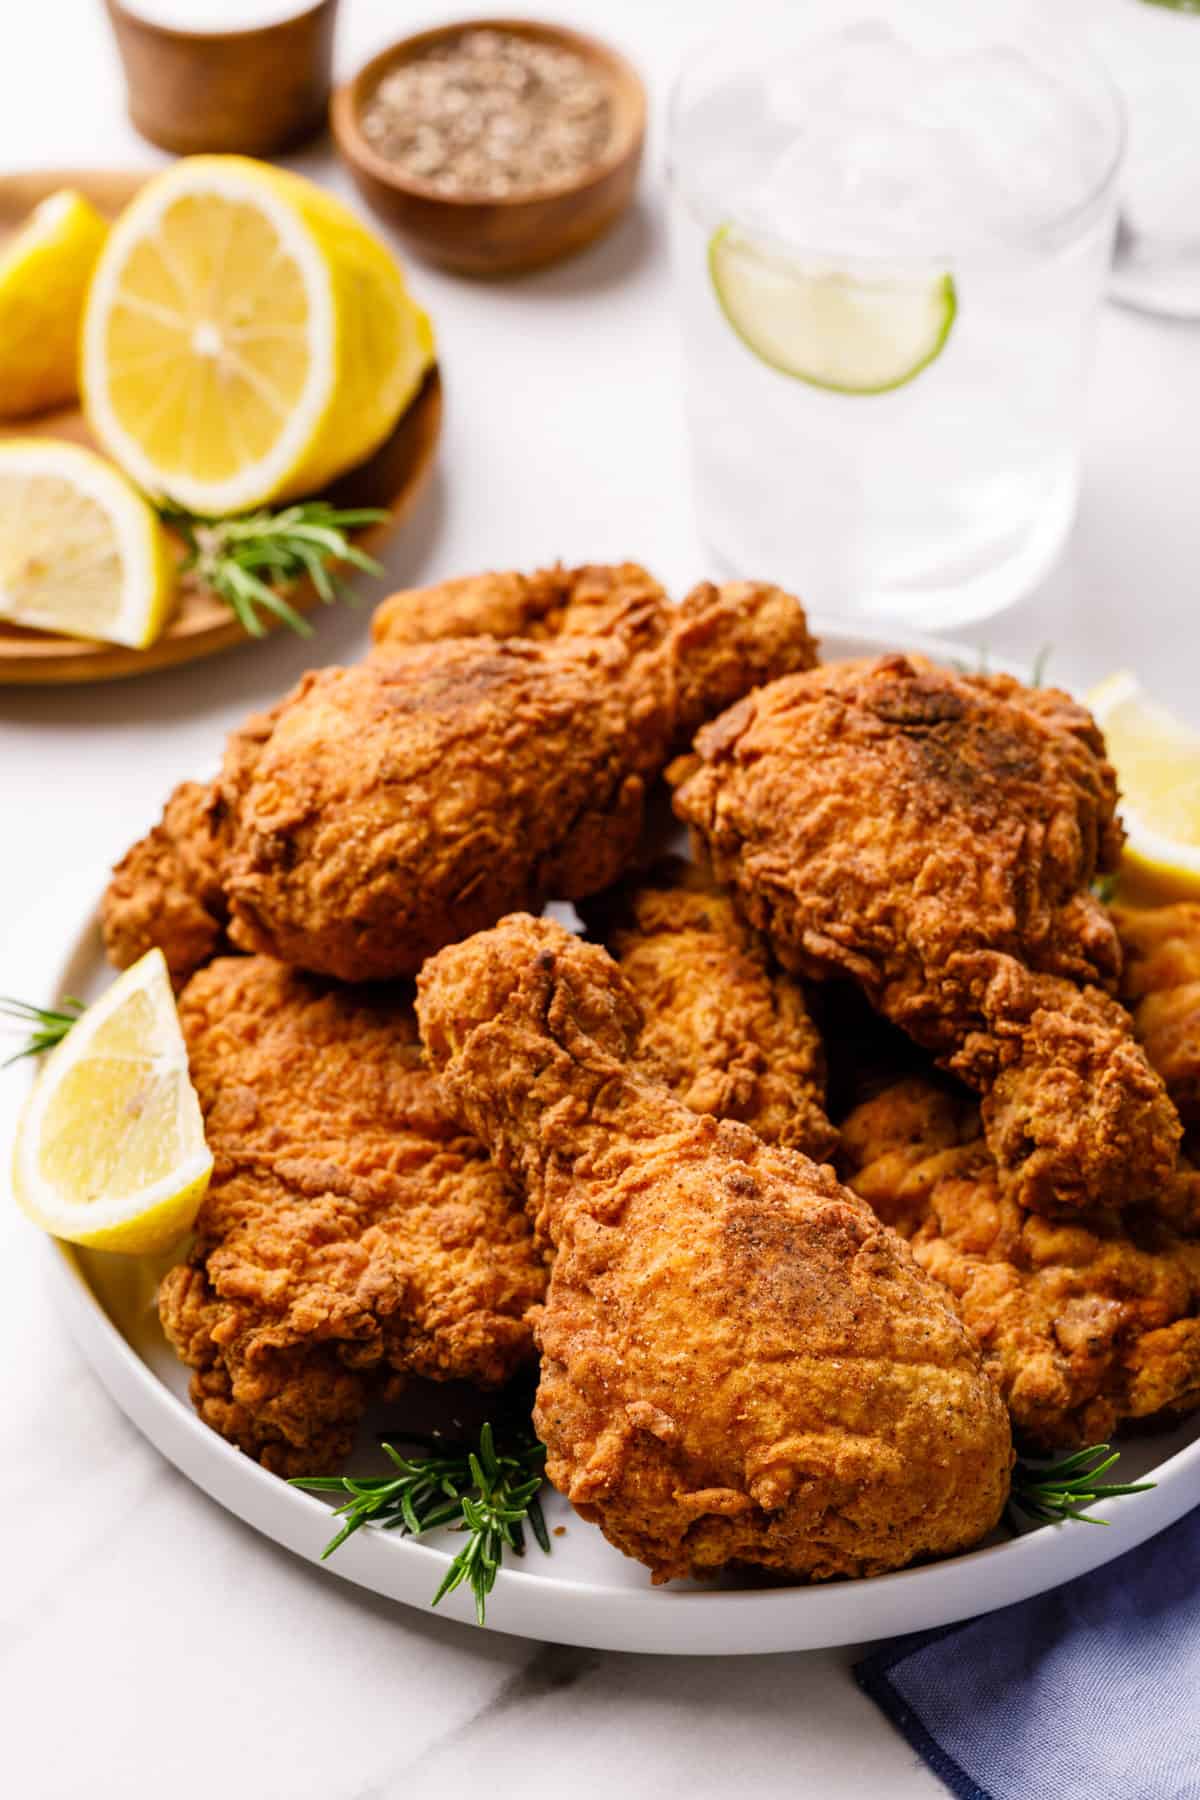 top down view of a plate of drumstick fried chicken garnished with rosemary and sliced lemon